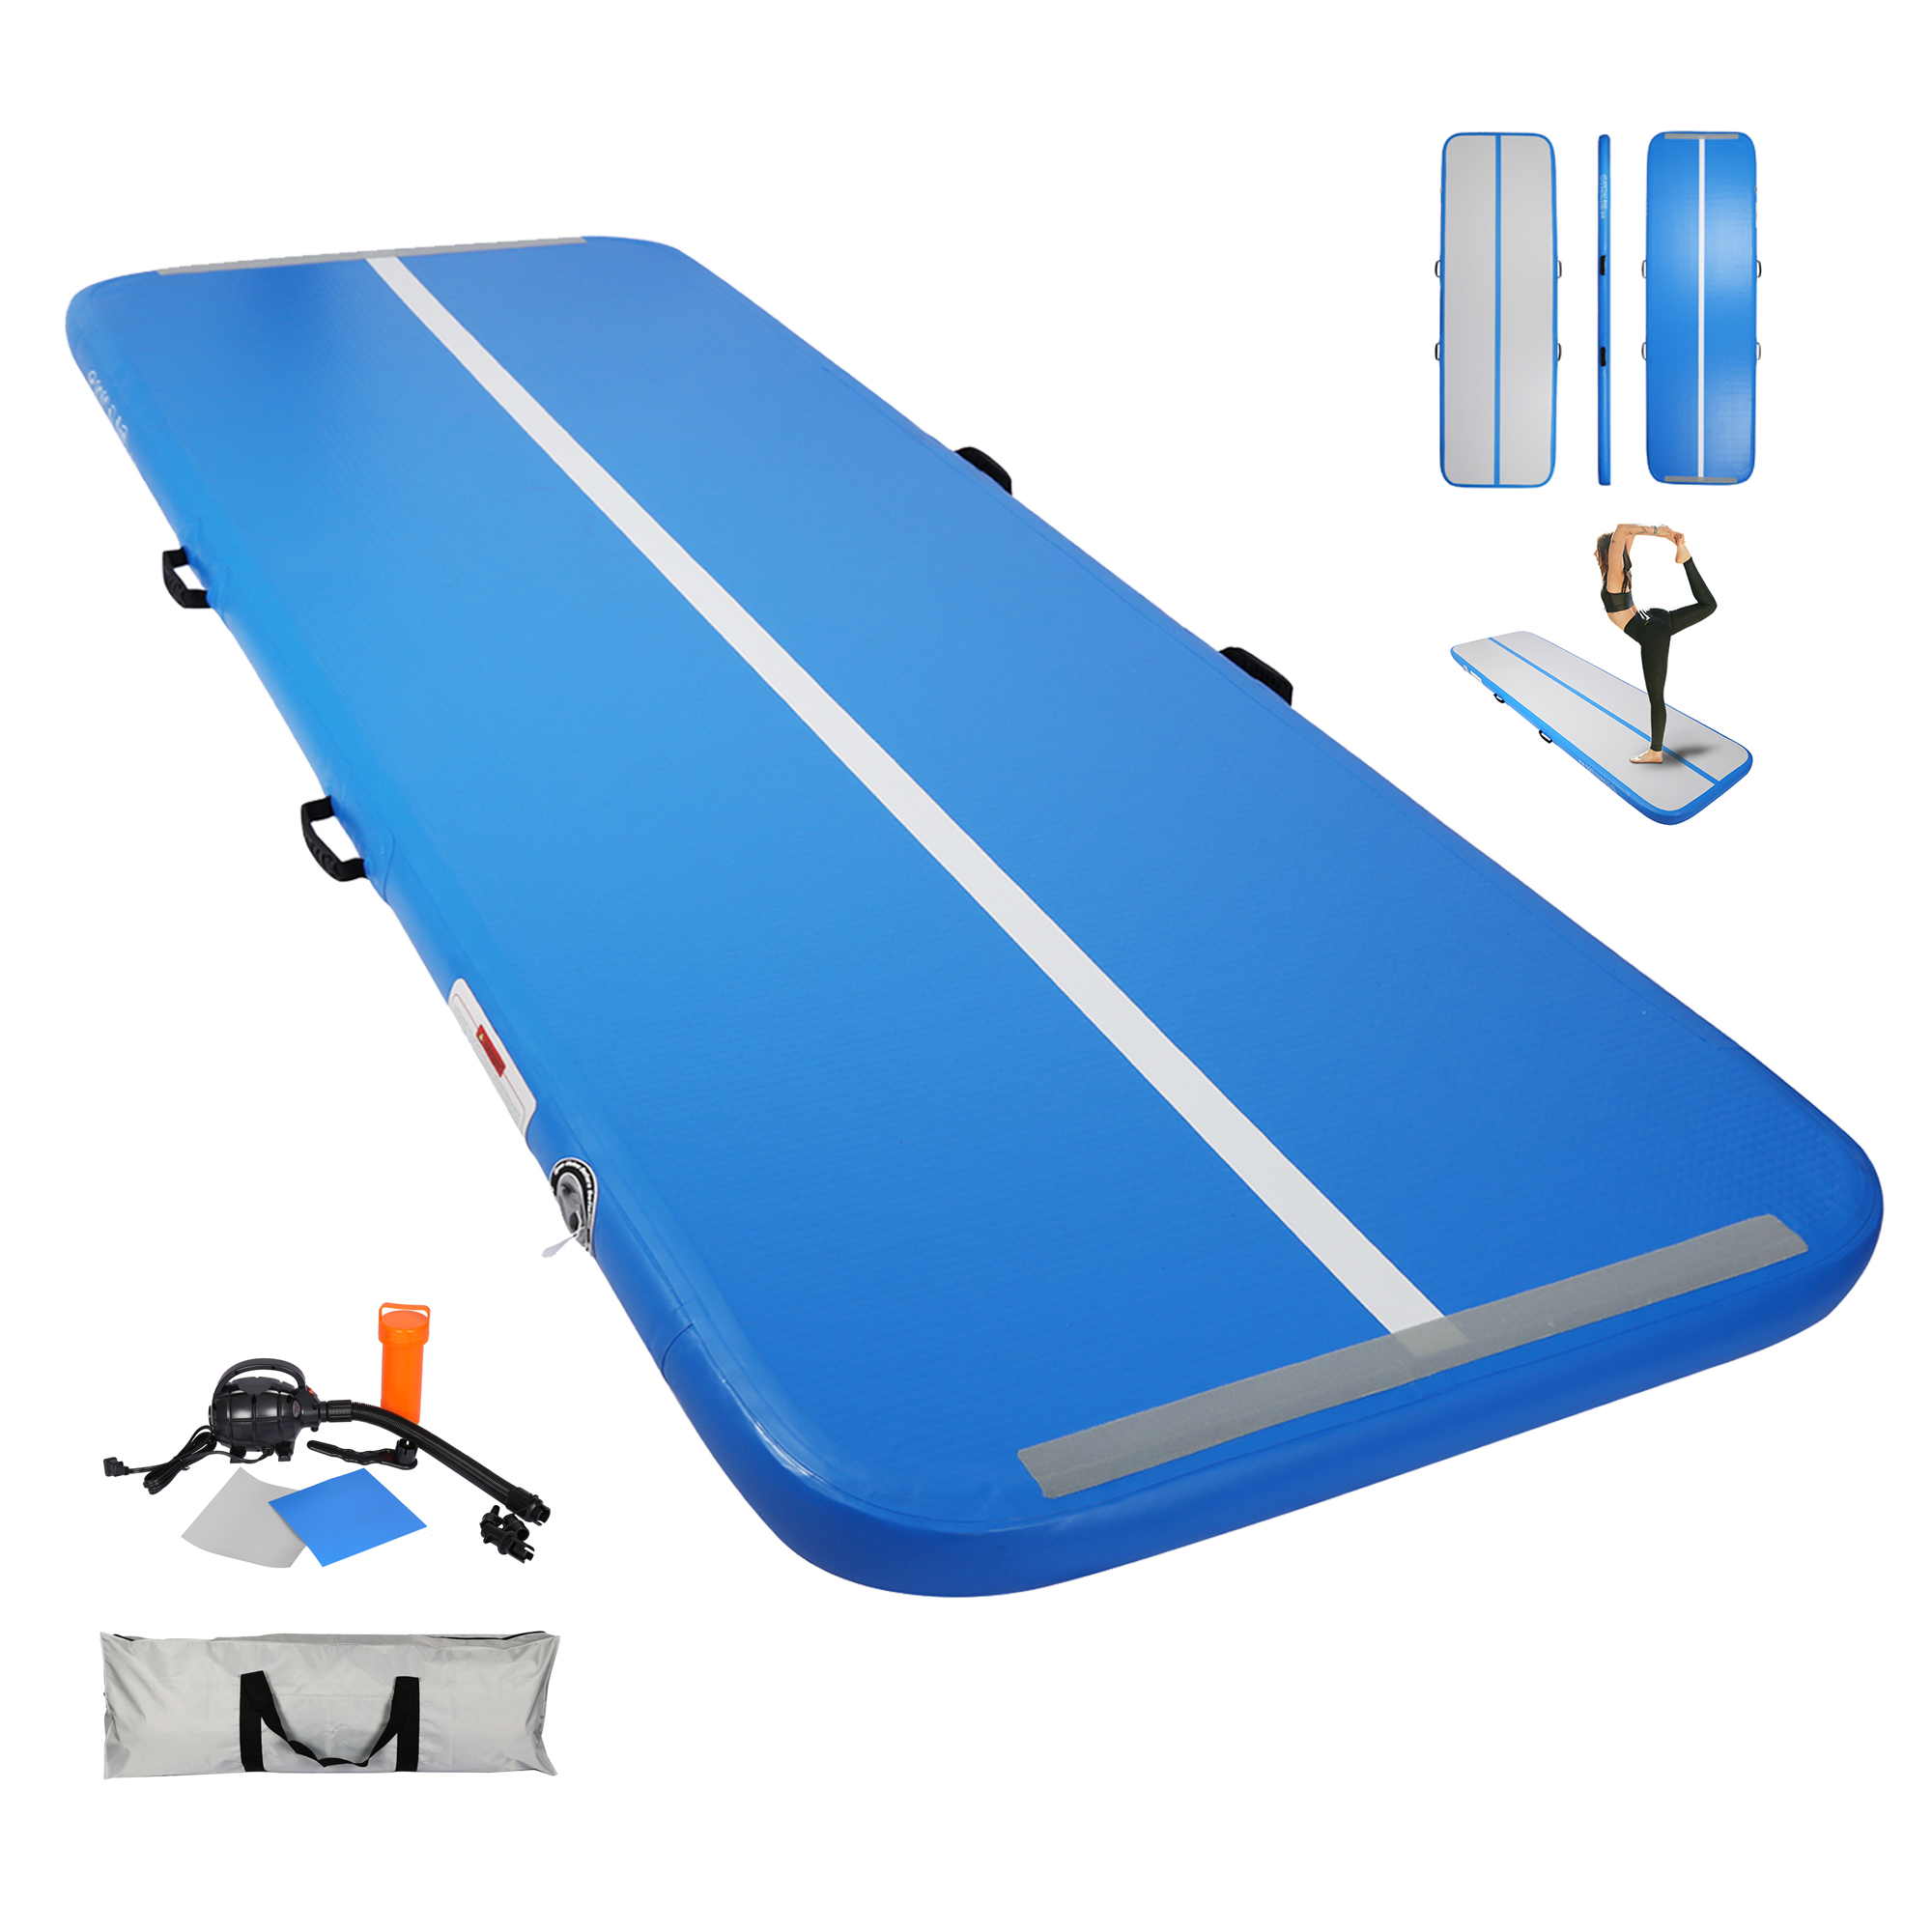 16ft Inflatable Tumbling Mat 4 inches Thickness Mats for Home Use/Training/Cheerleading/Yoga/Water with electircal Pump-CASAINC